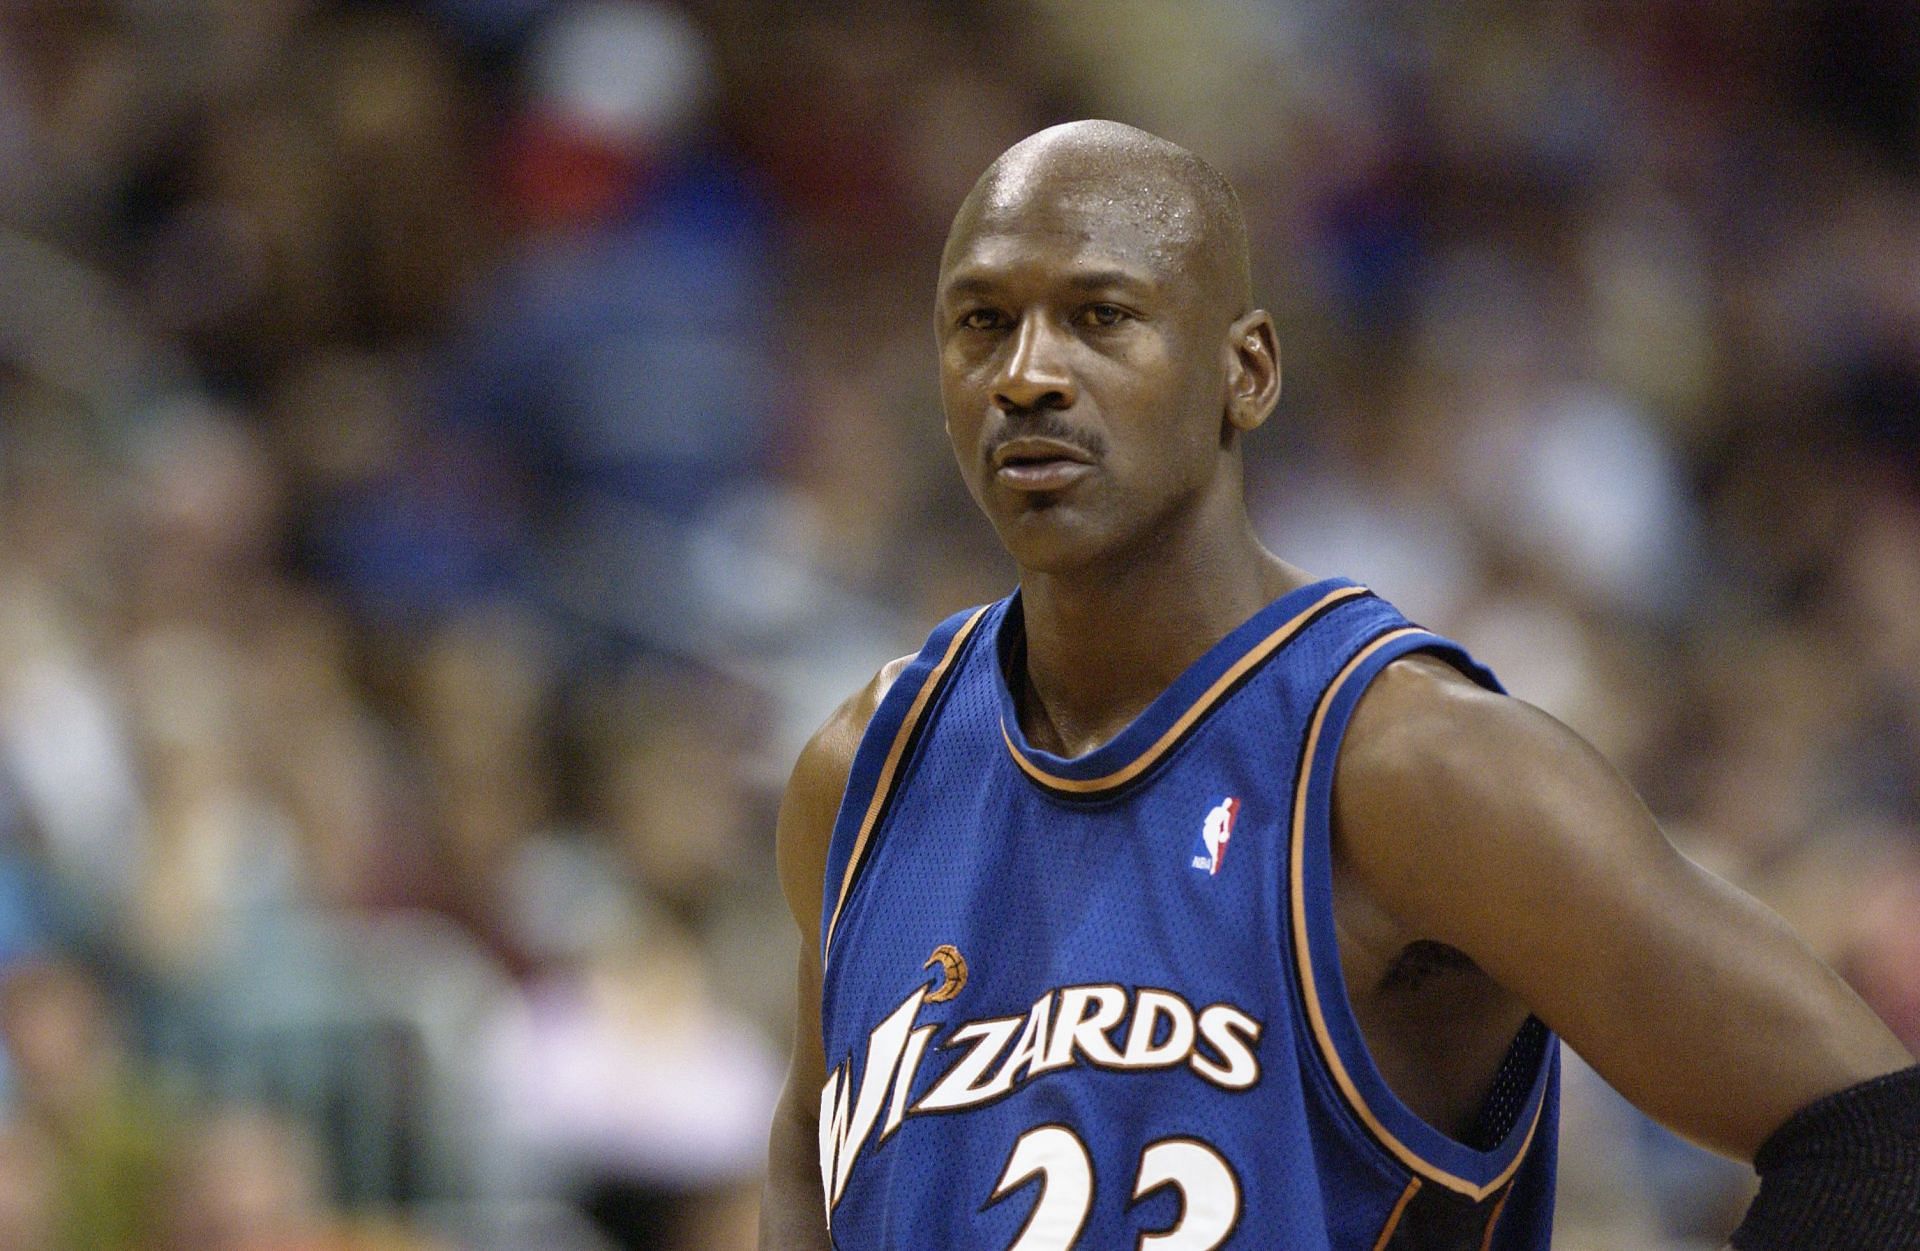 Michael Jordan during his stint with the Washington Wizards.